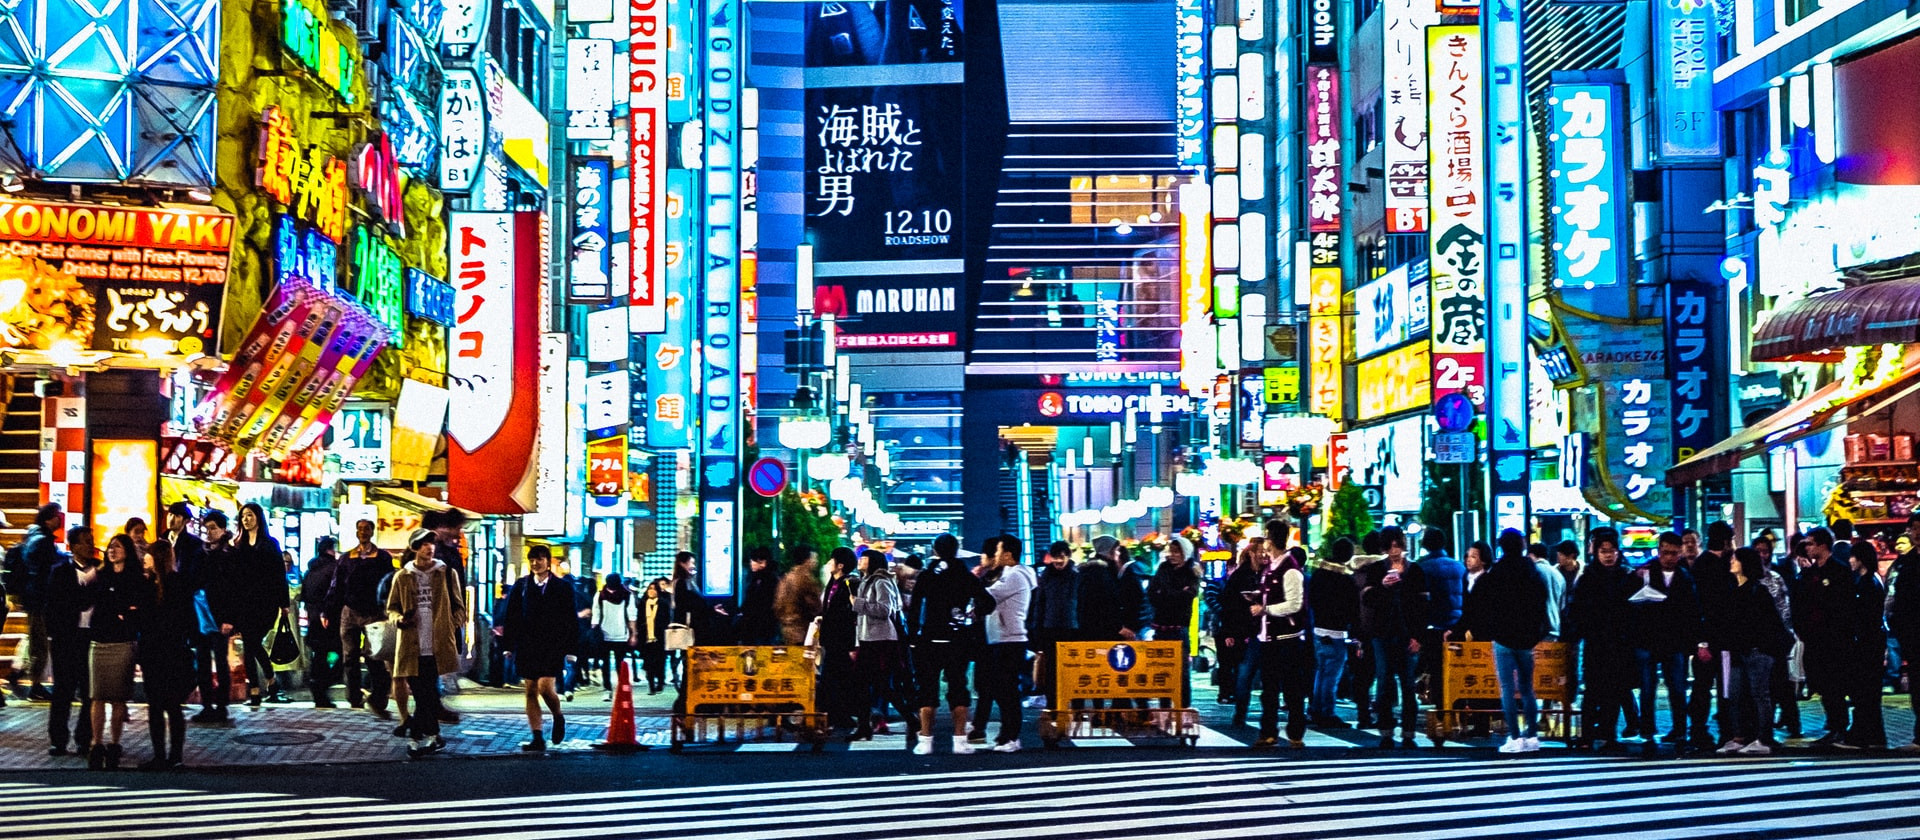 People crossing a busy street with shops at night in Japan